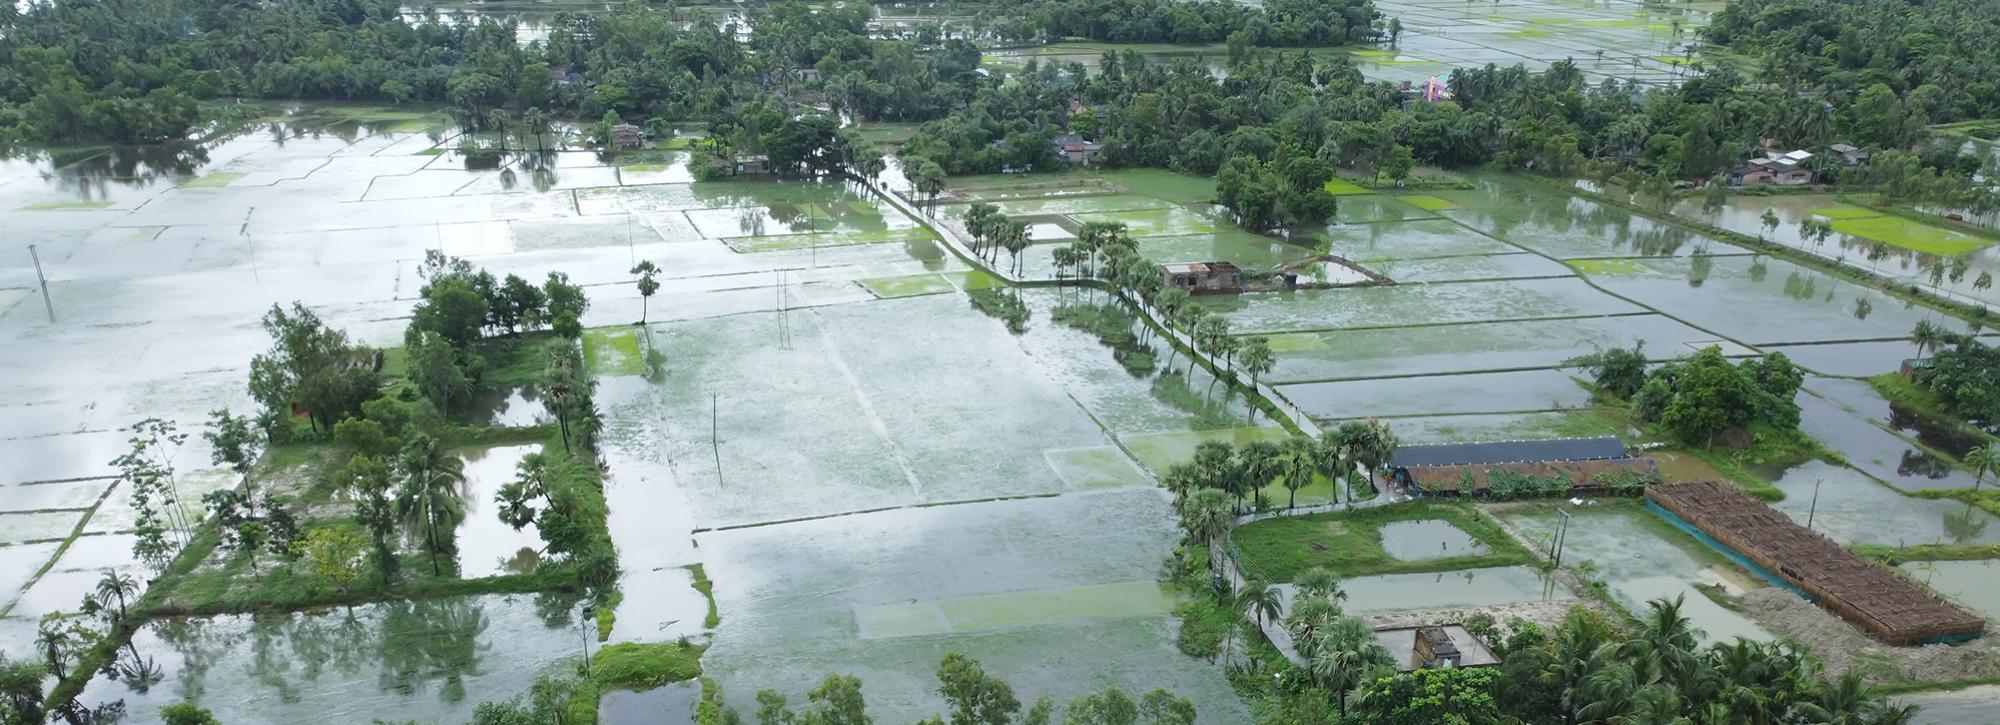 Flooded fields in west bengal